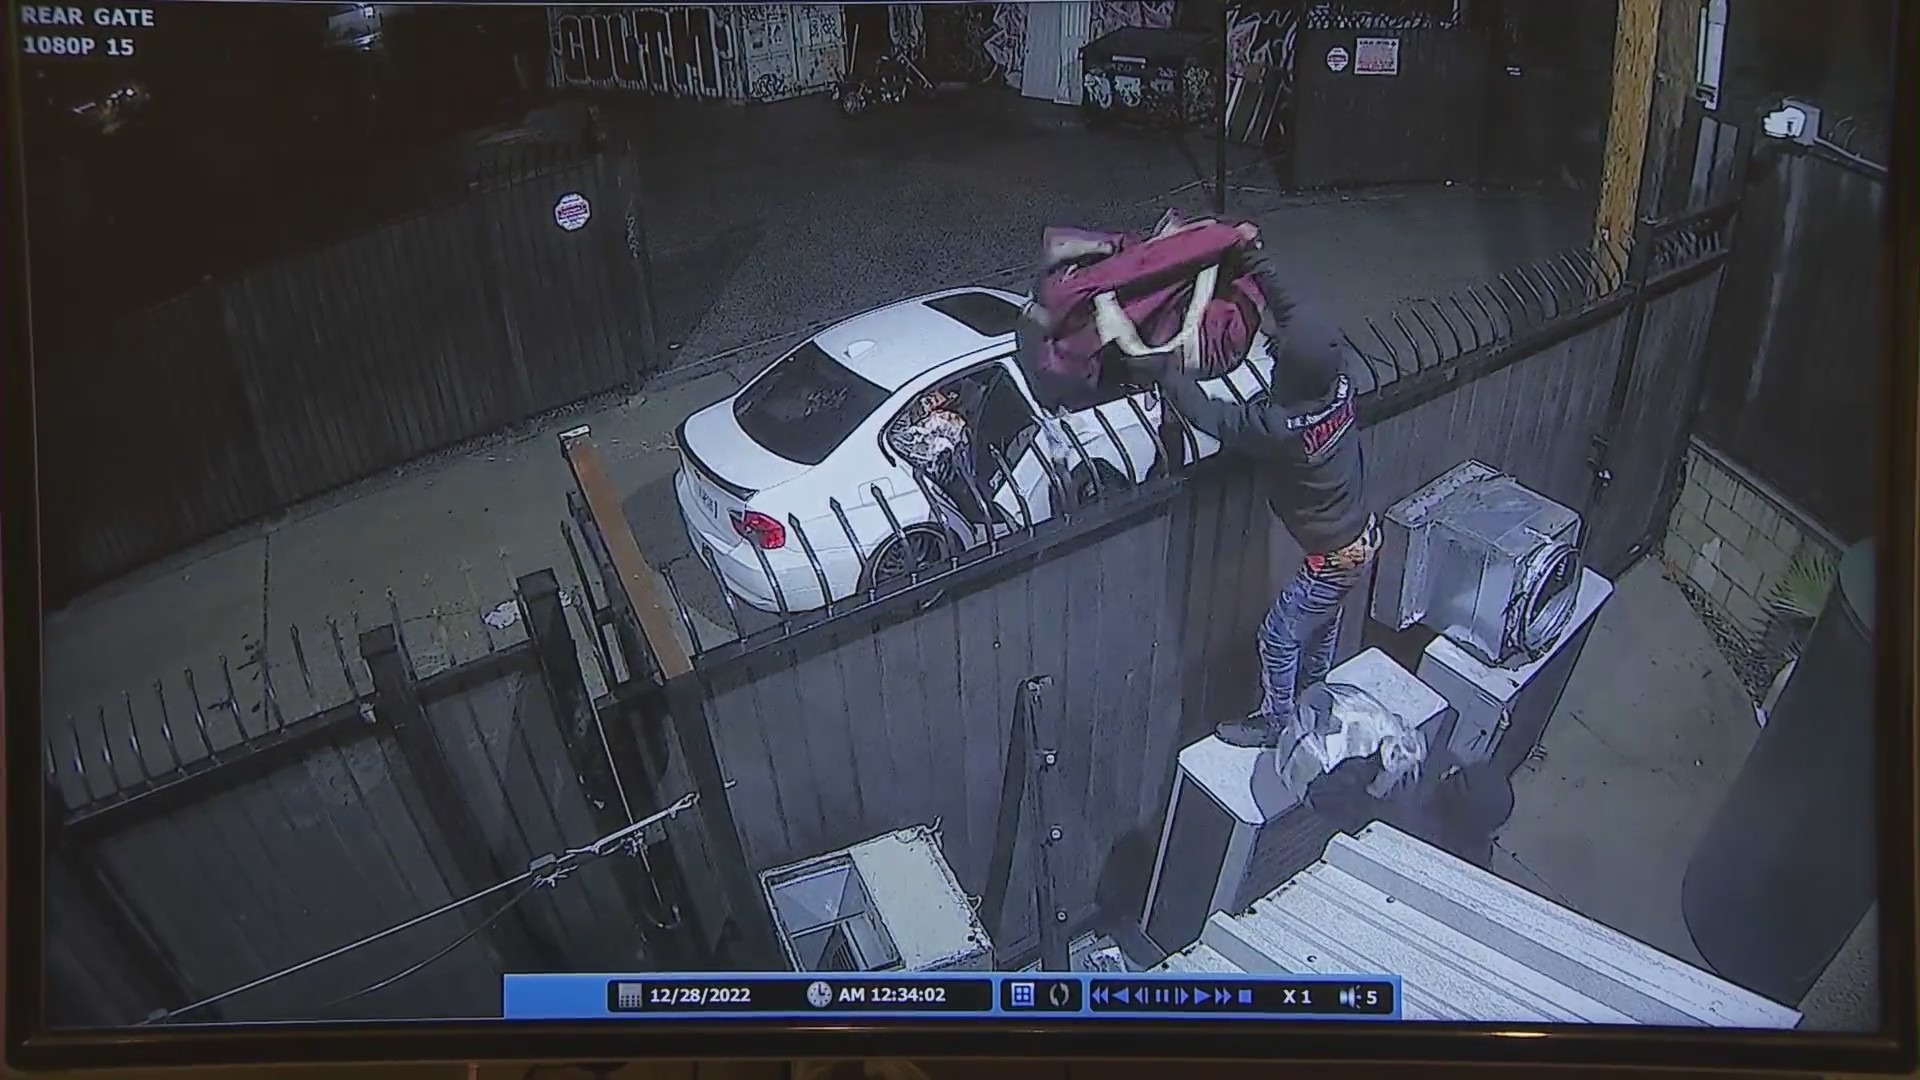 Security camera captured thieves who struck a Silver Lake dispensary on Dec. 28, 2022.